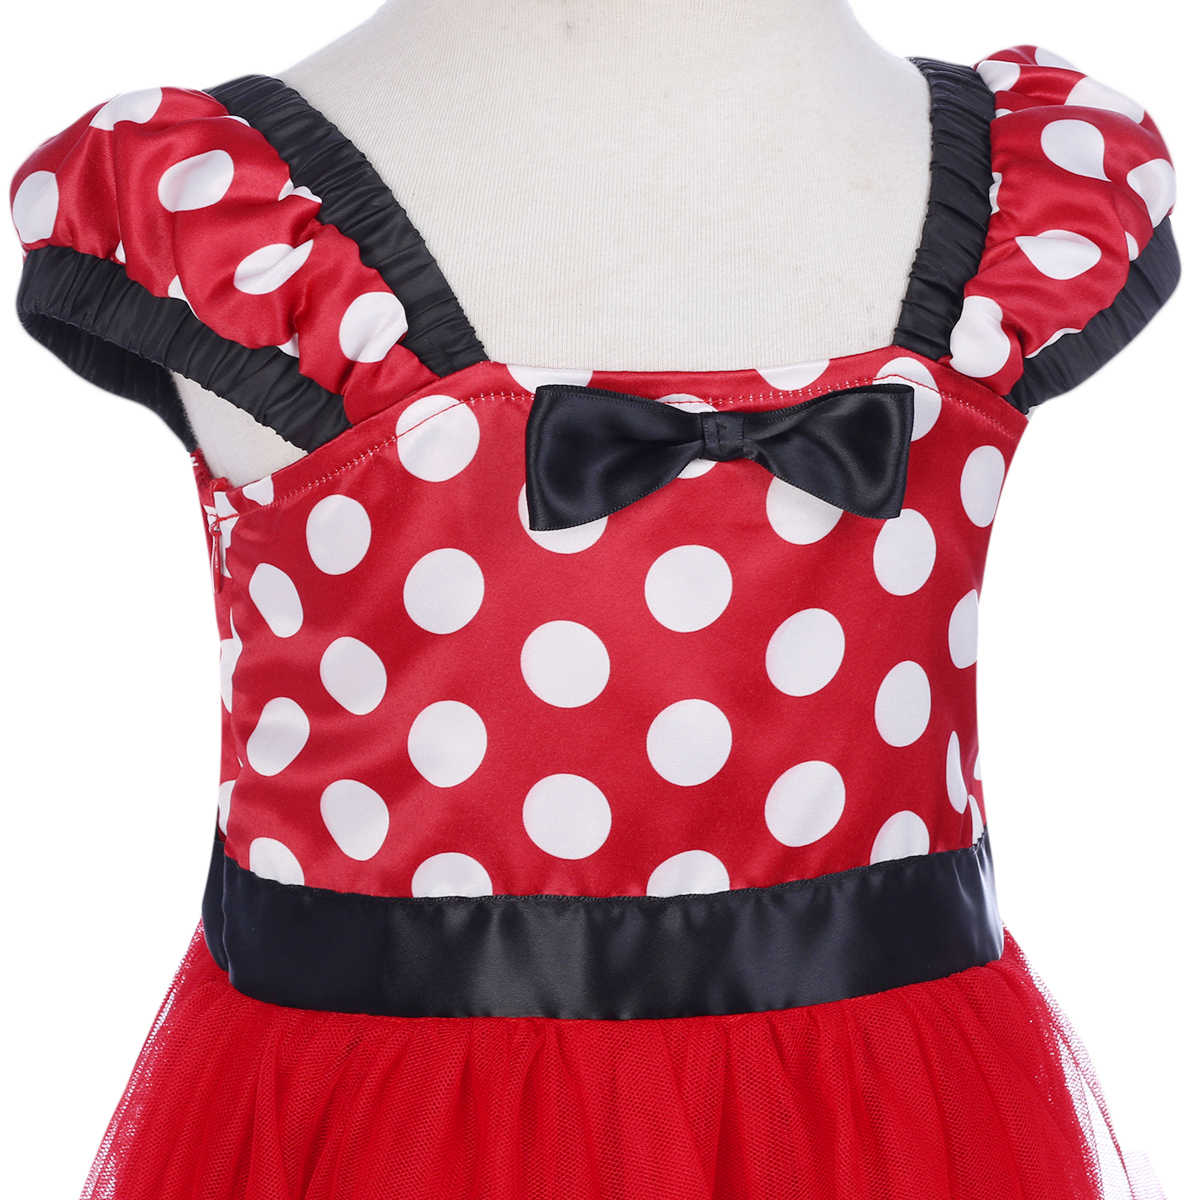 IBTOM CASTLE Toddler Girls Polka Dots Princess Party Cosplay Pageant Fancy Dress up Birthday Tutu Dress + Ears Headband Outfit Set 3-4 Years Red - image 5 of 8